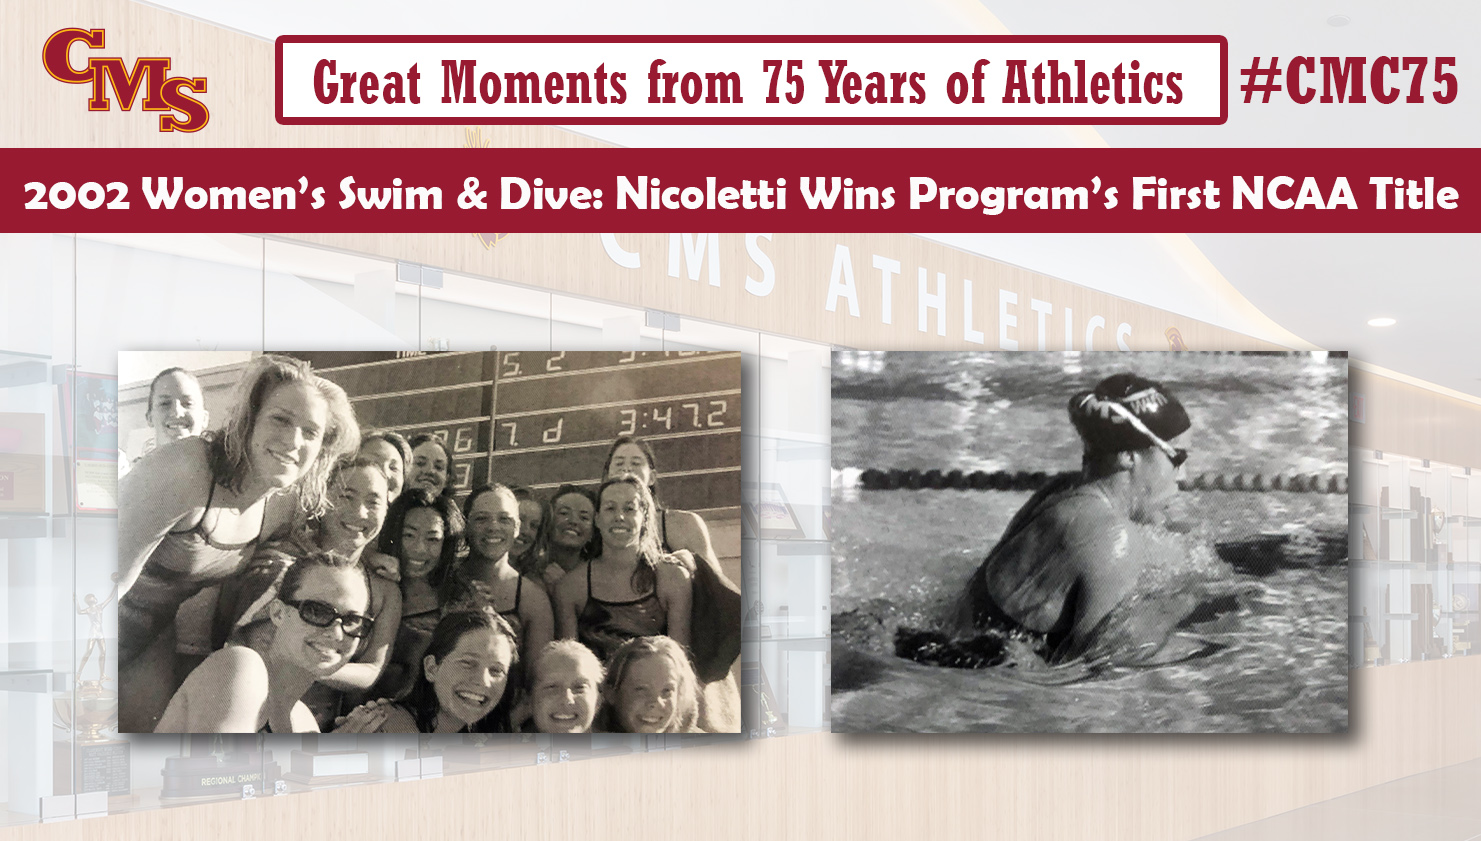 A team photo of the 2002 swim and dive team and an action photo of Suzy Nicoletti. Words over the photo read: Great Moments from 75 Years of Athletics, 2002 Women's Swim & Dive: Nicoletti Wins Program's First NCAA Title